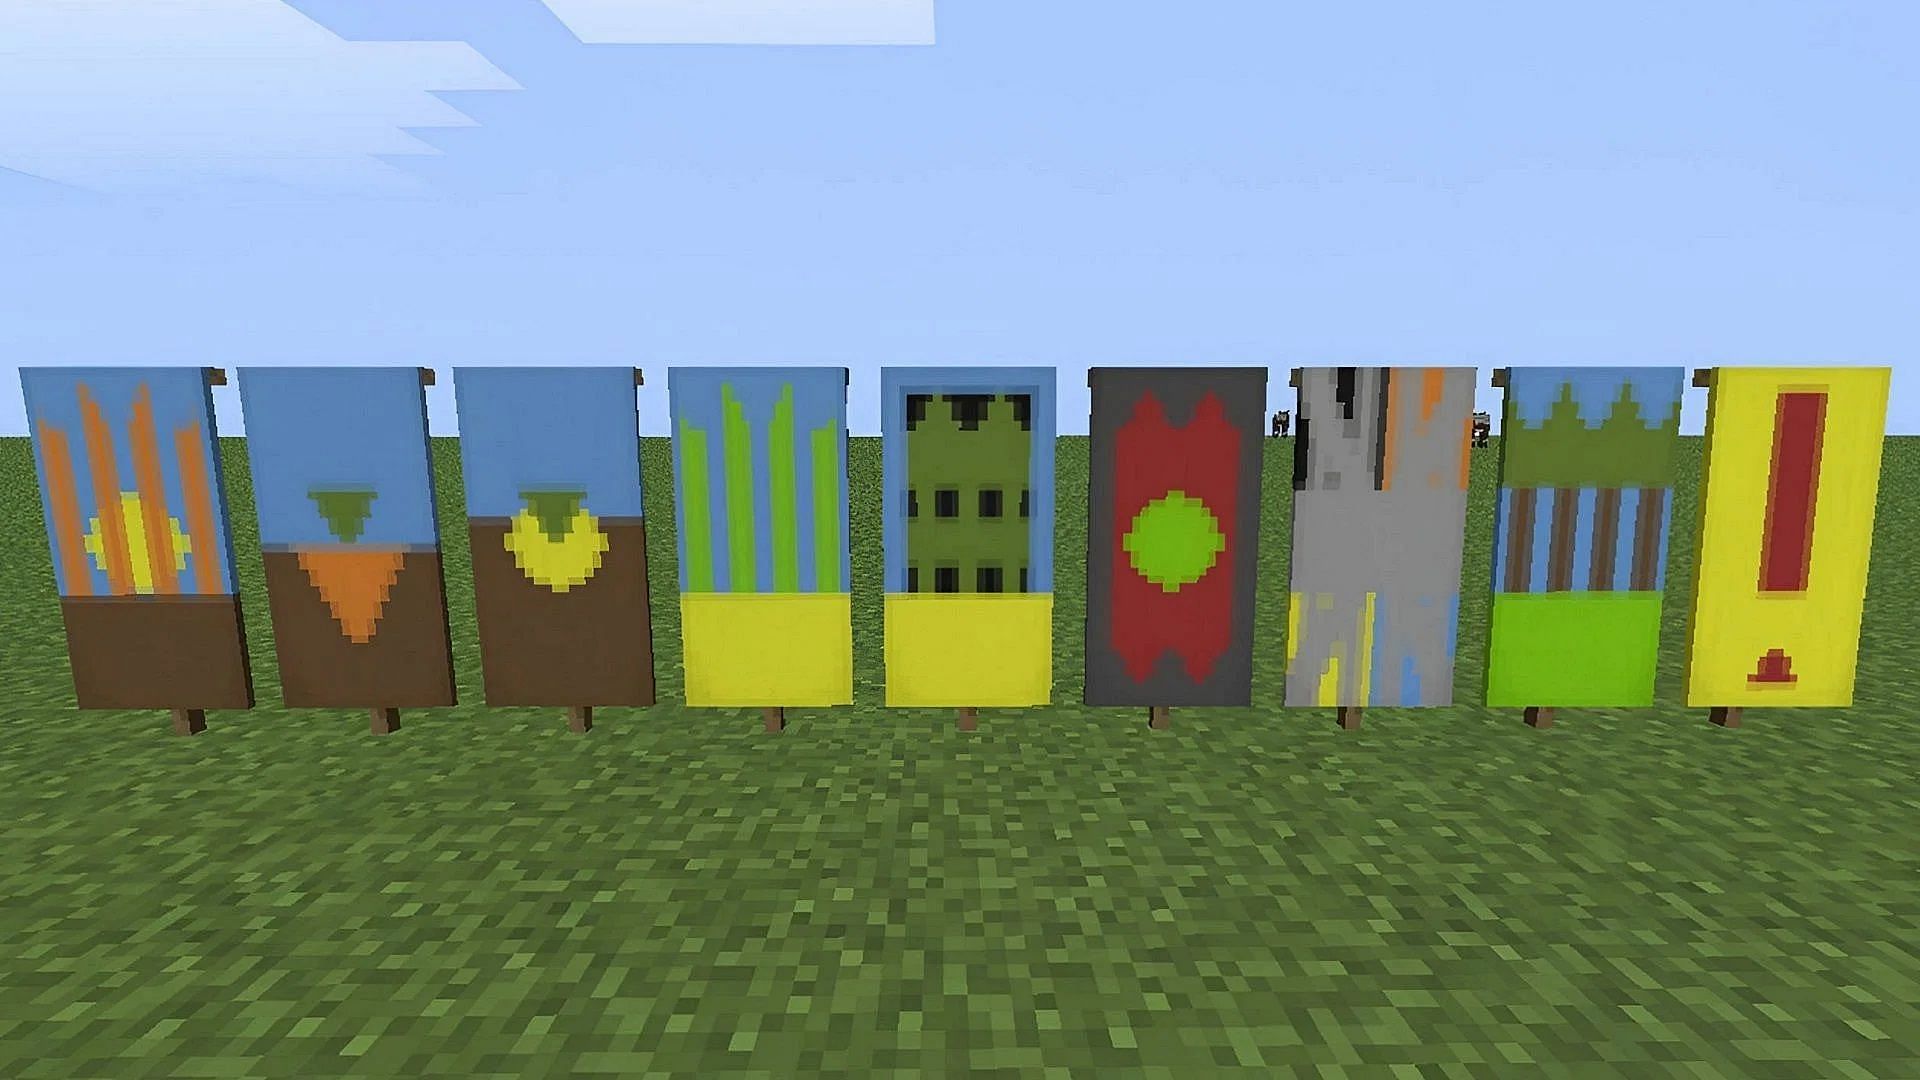 Customized banners in Minecraft (Image via Mojang)